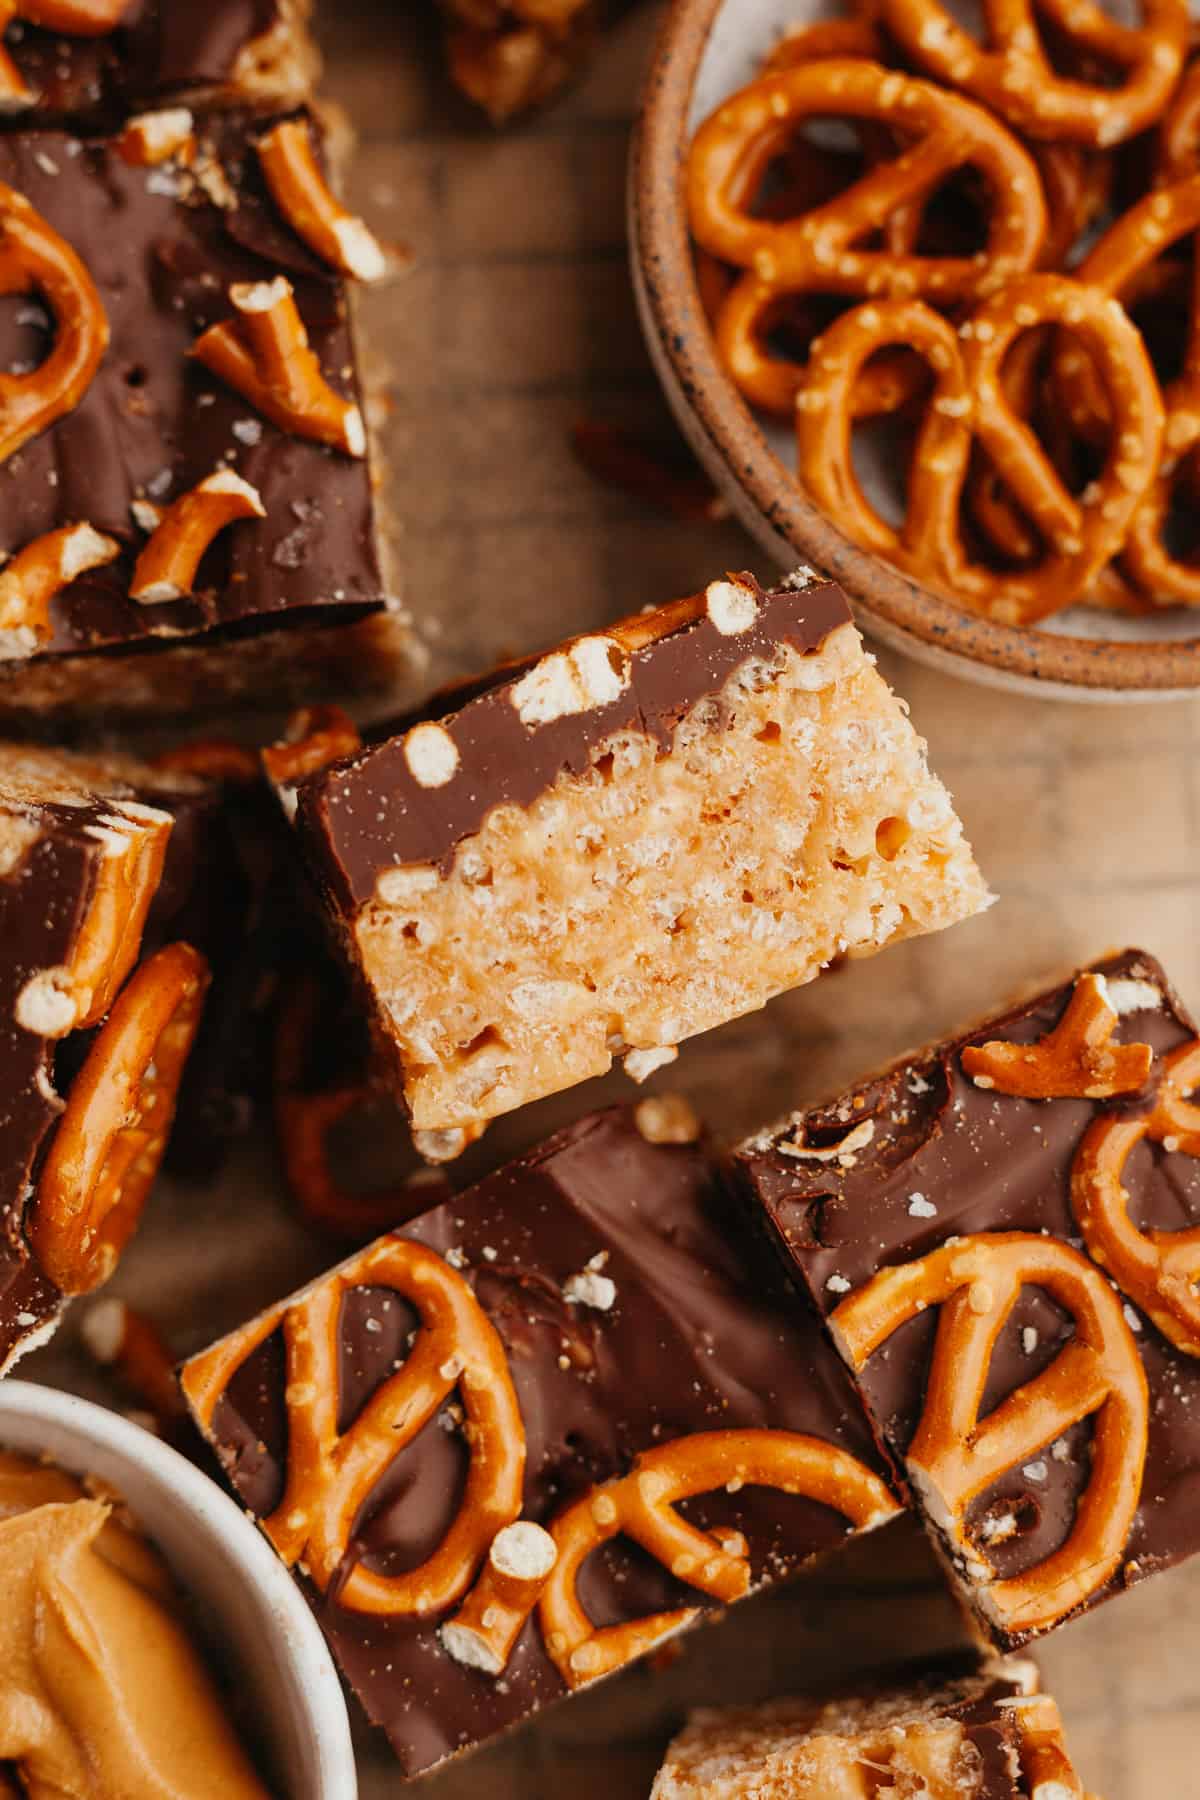 Peanut butter chocolate rice krispie treat squares, topped with pretzels.